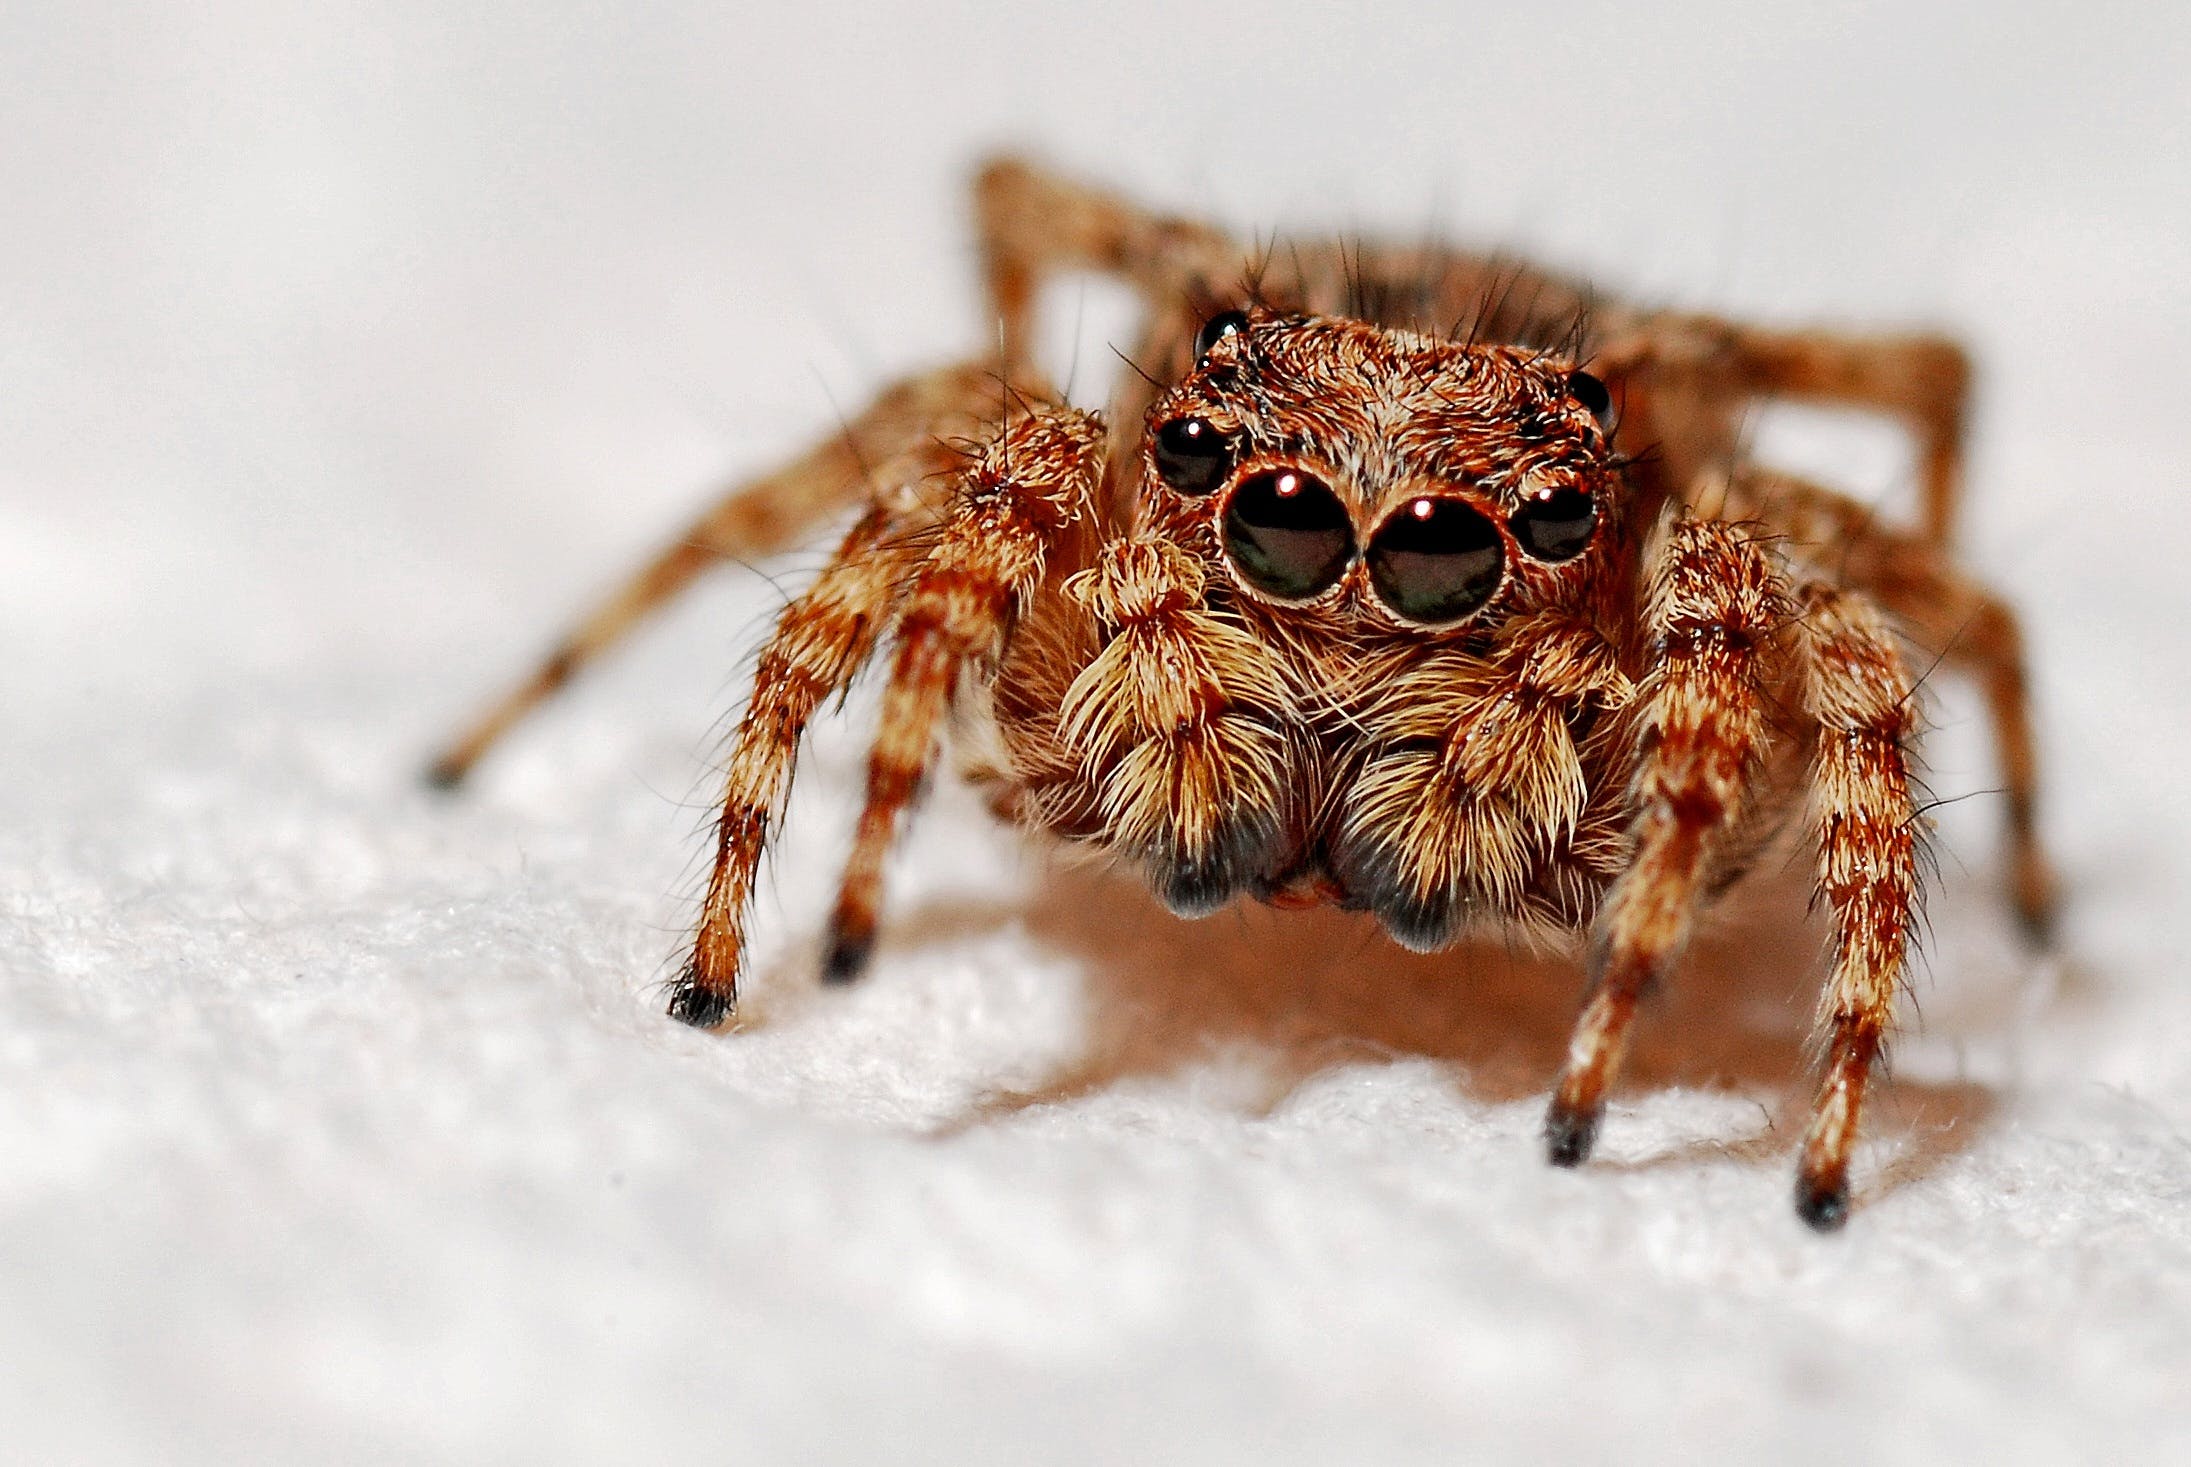 Selective Focus Photography of Brown and Black Jumping Spider on White Textile